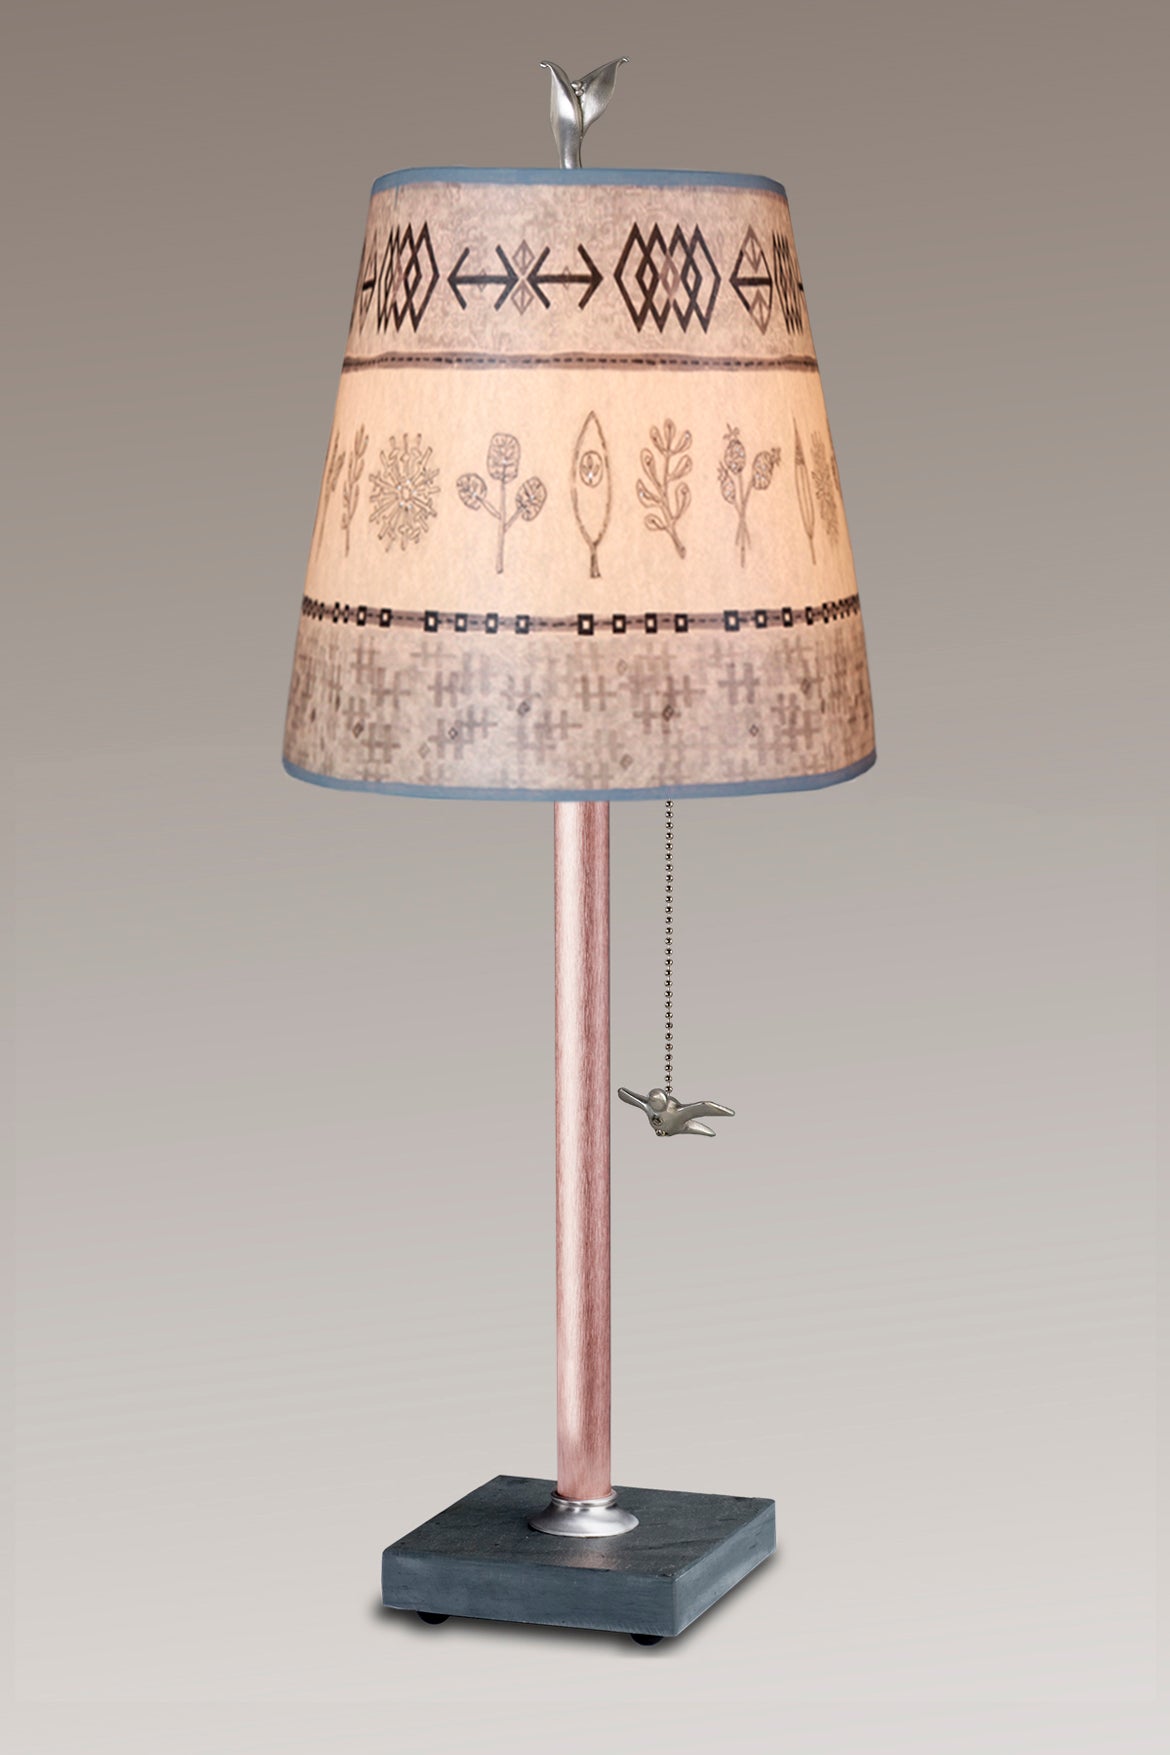 Janna Ugone & Co Table Lamps Copper Table Lamp with Small Drum in Woven & Sprig in Mist